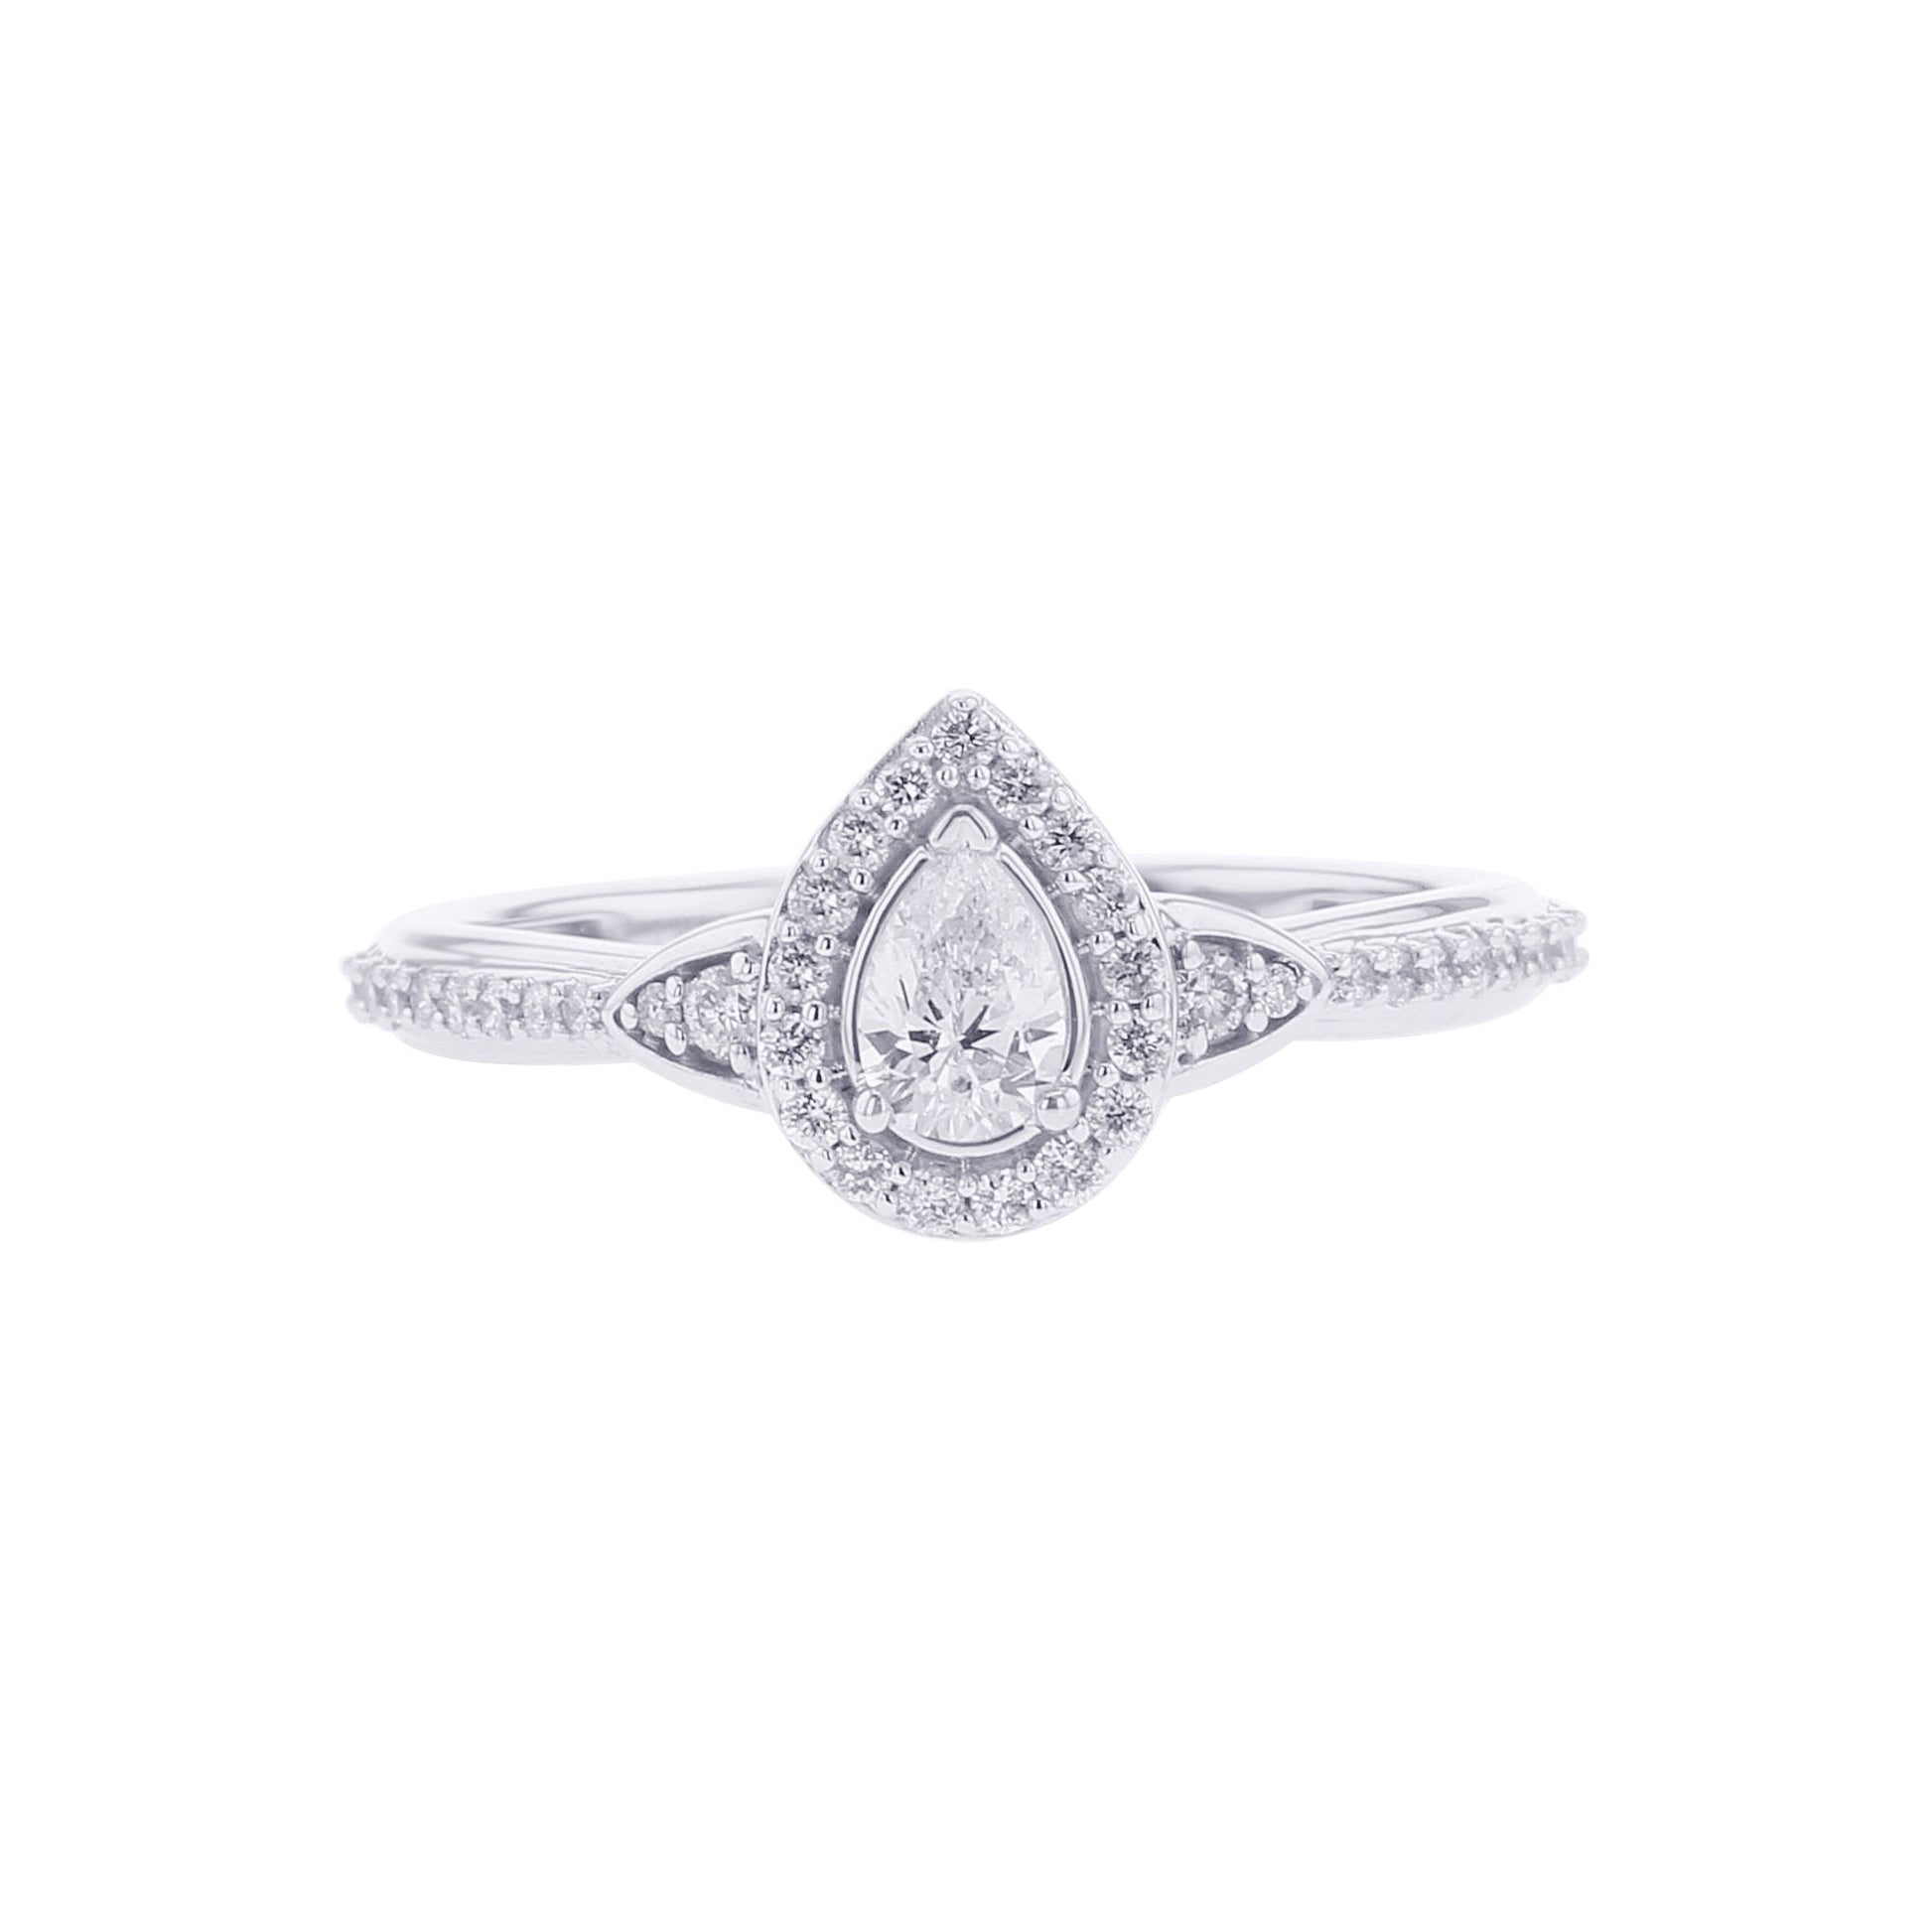 Paola Pear Halo Ready for Love Diamond Engagement Ring